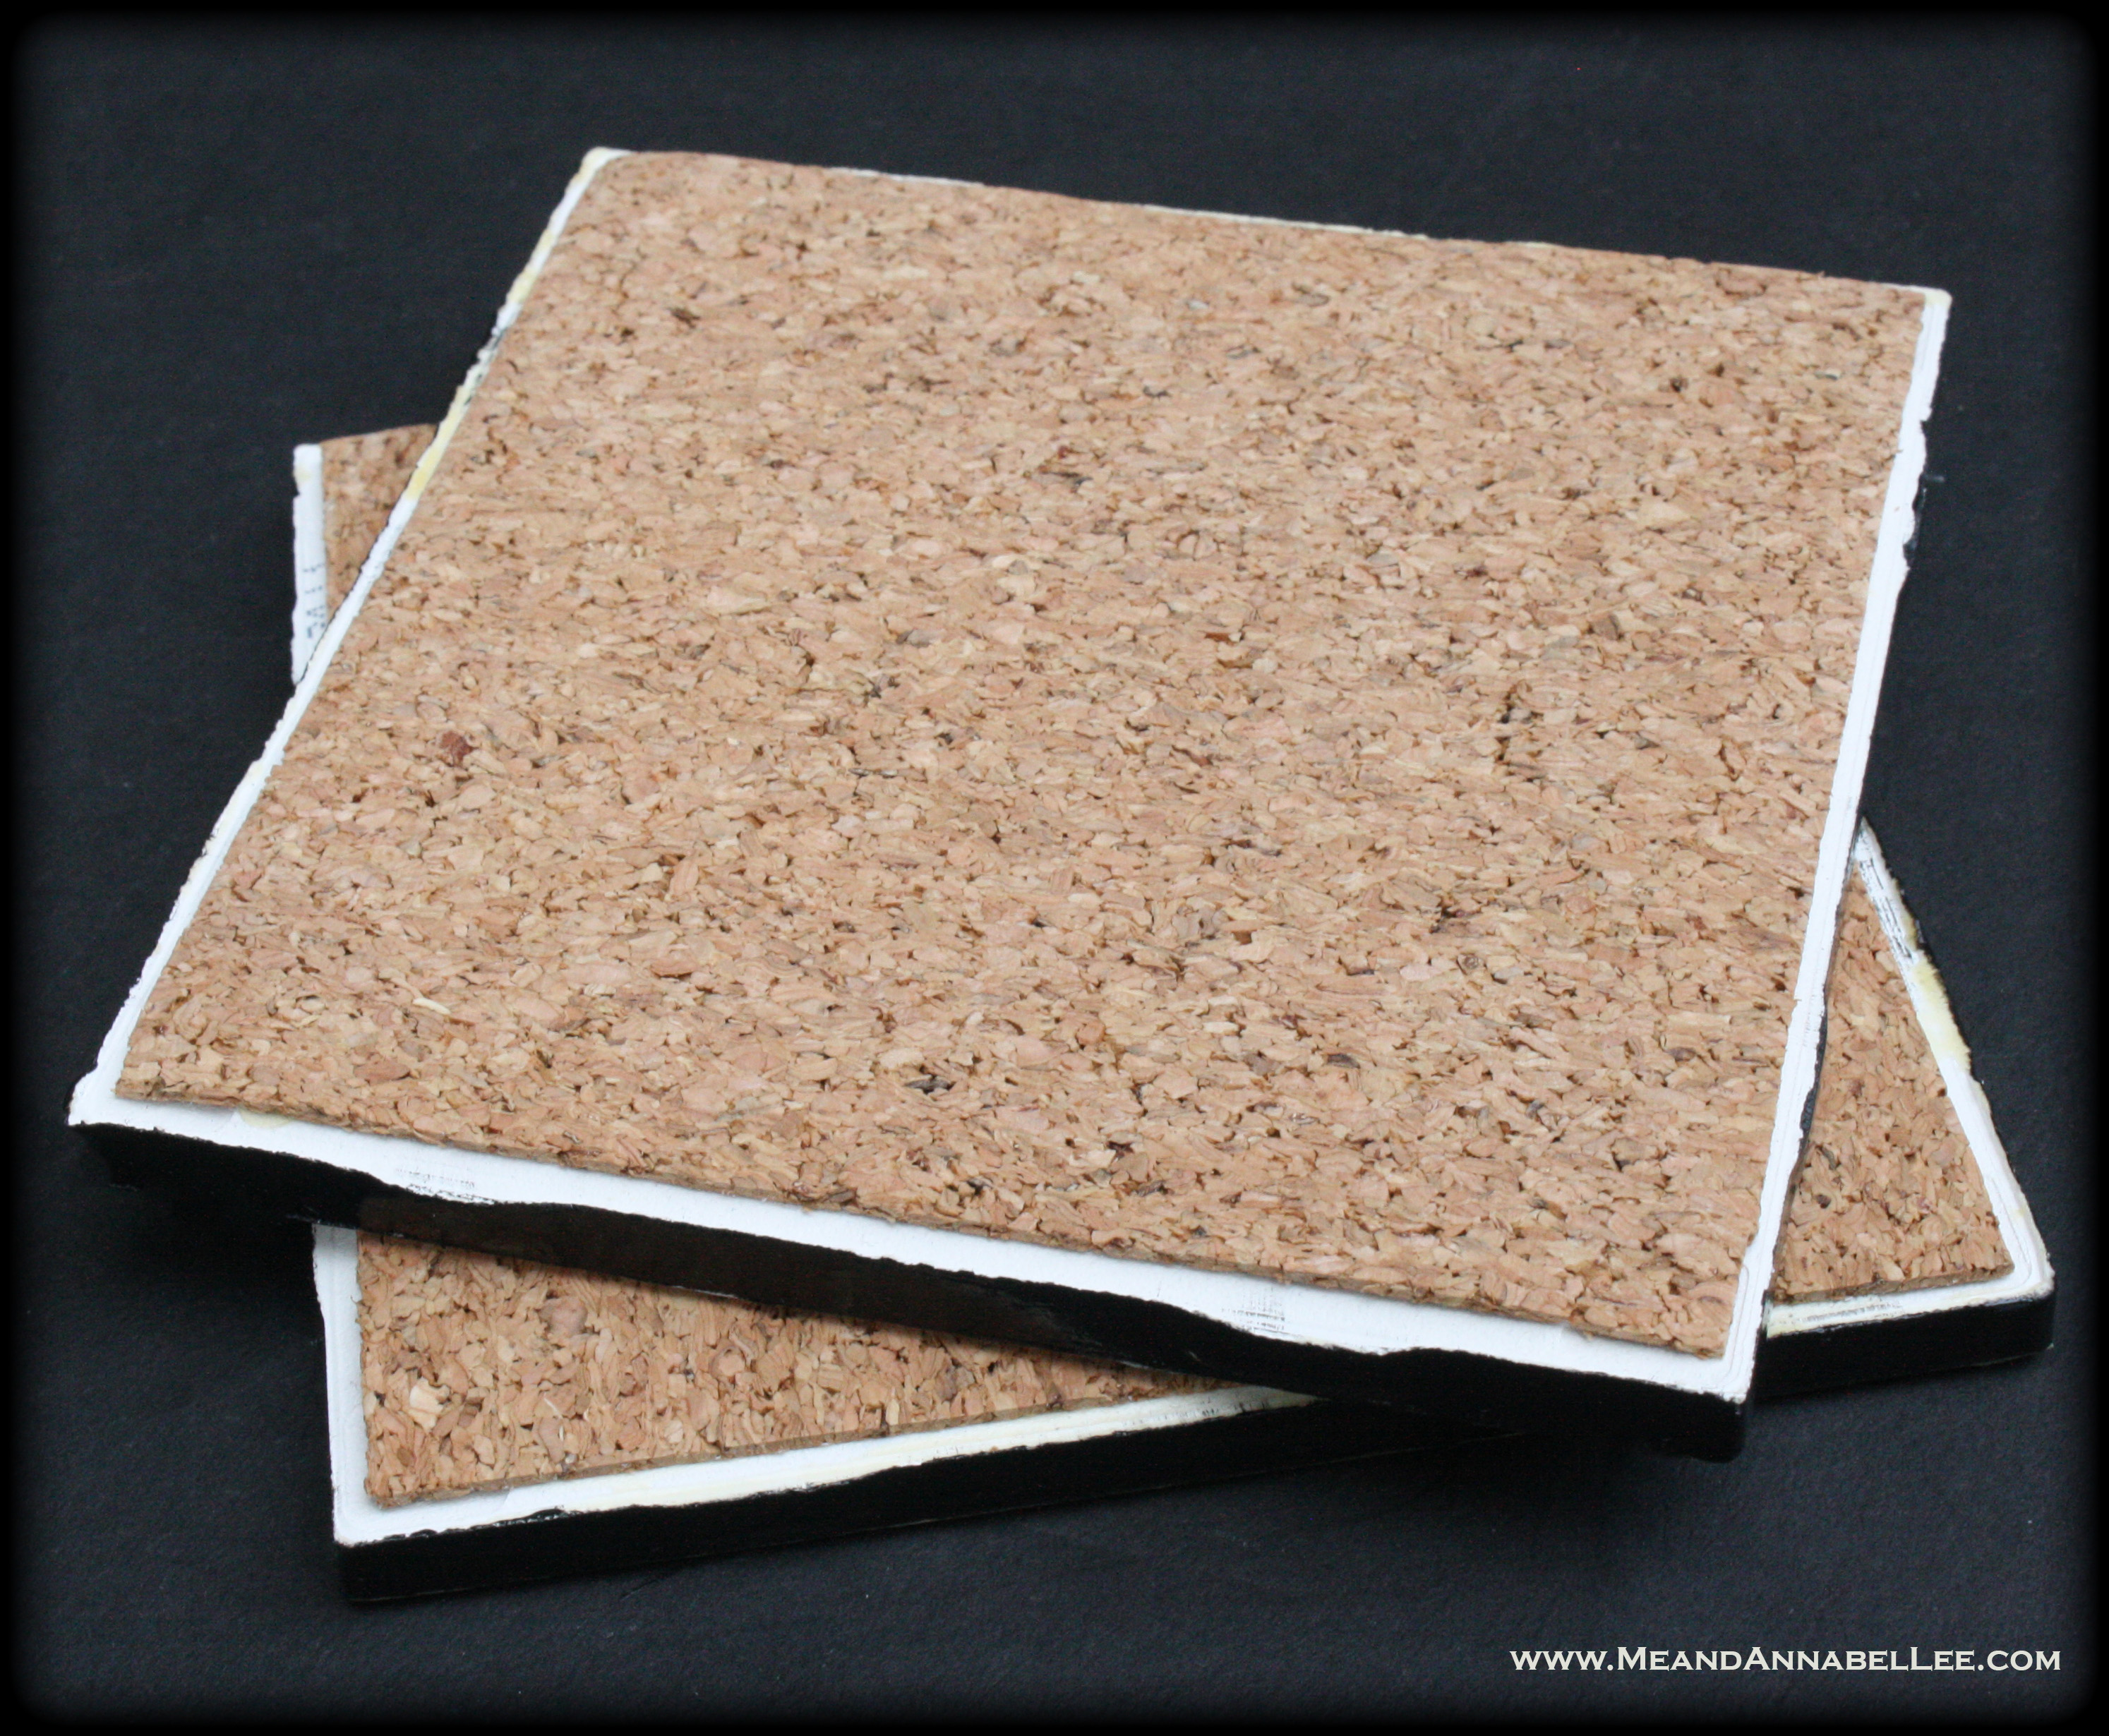 4 x 4 Ceramic Tile Crafts | Finish bottom with Cork | Image Transfer Drink Coasters | www.MeandAnnabelLee.com